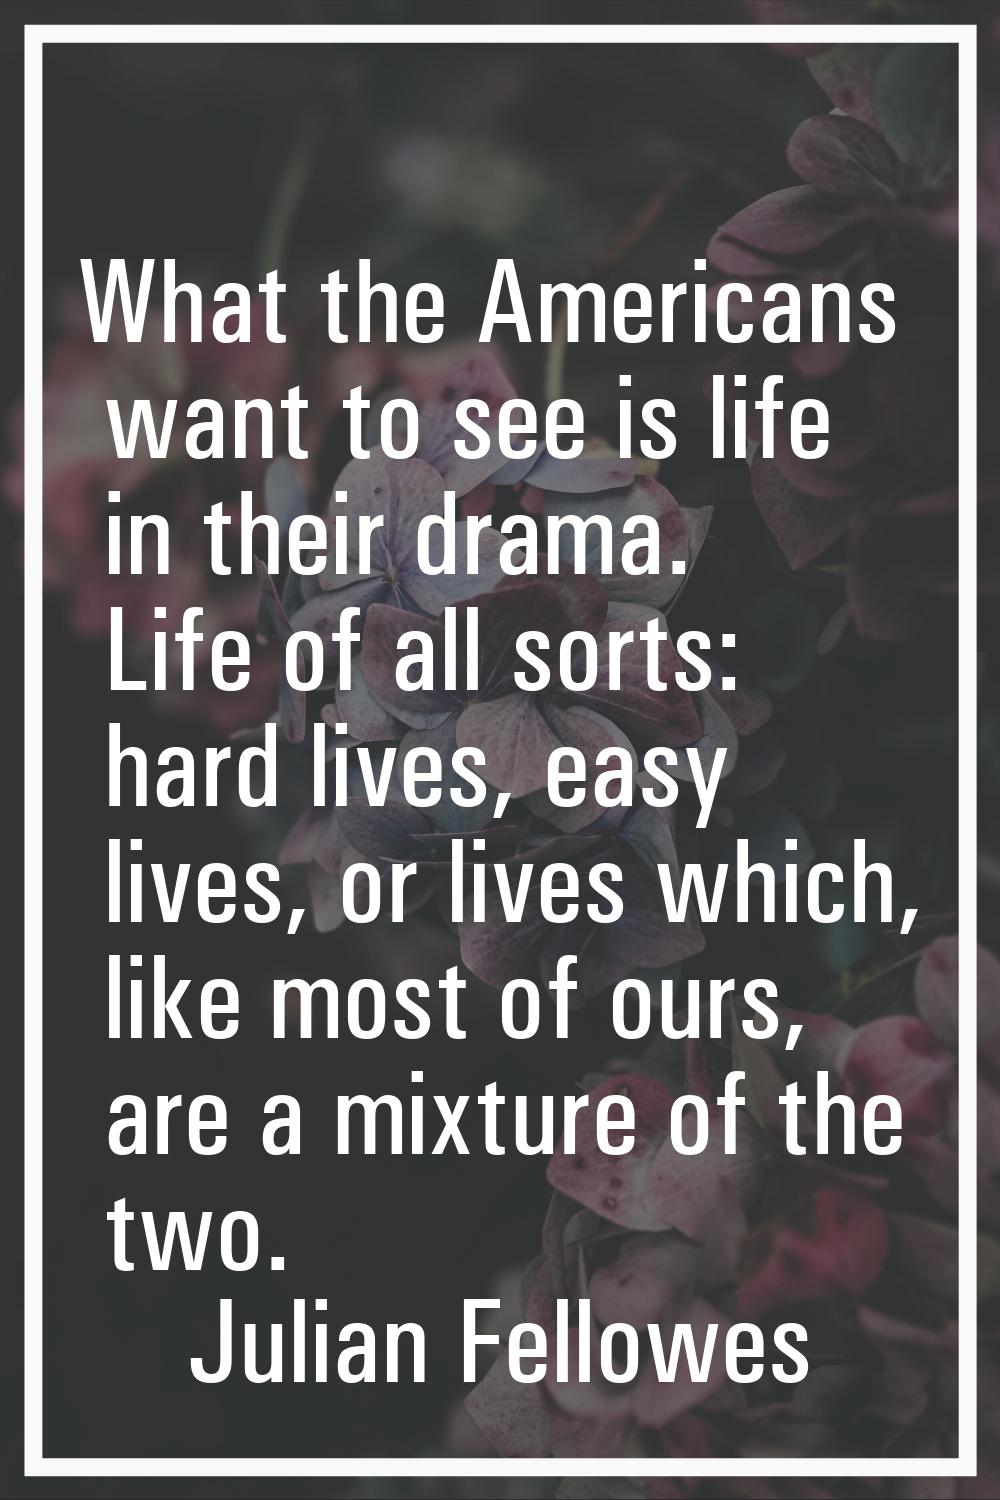 What the Americans want to see is life in their drama. Life of all sorts: hard lives, easy lives, o